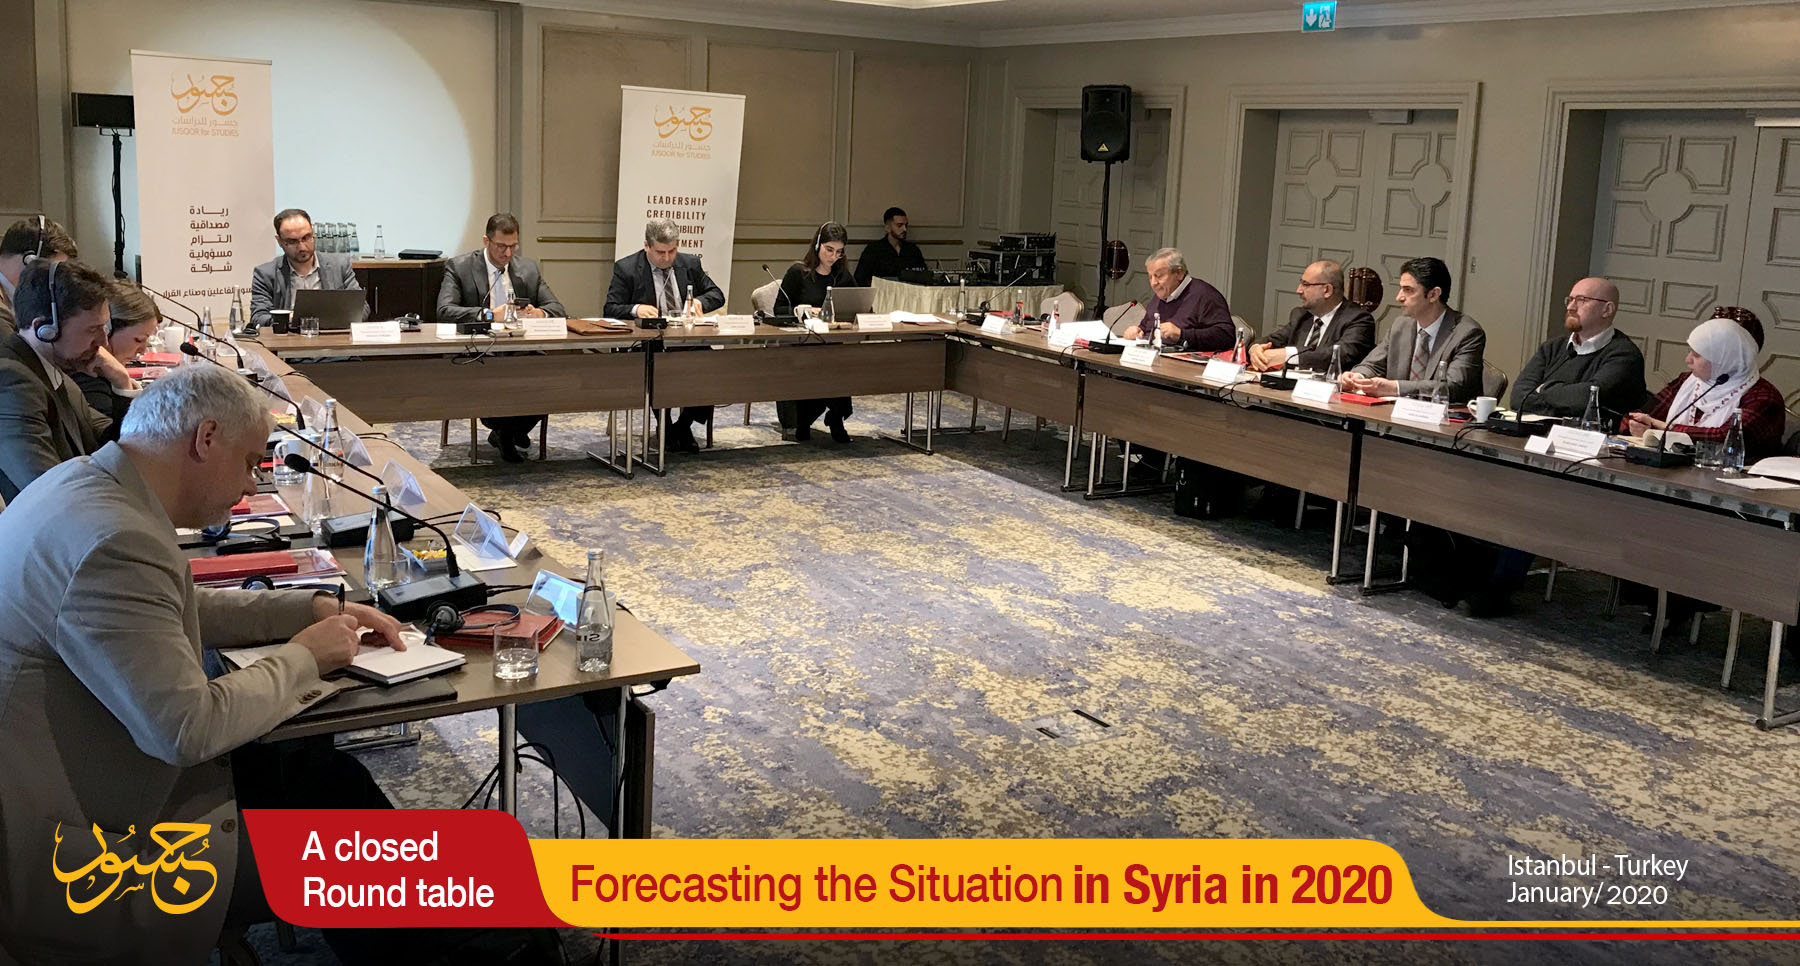 Forecasting the Situation in Syria in 2020 